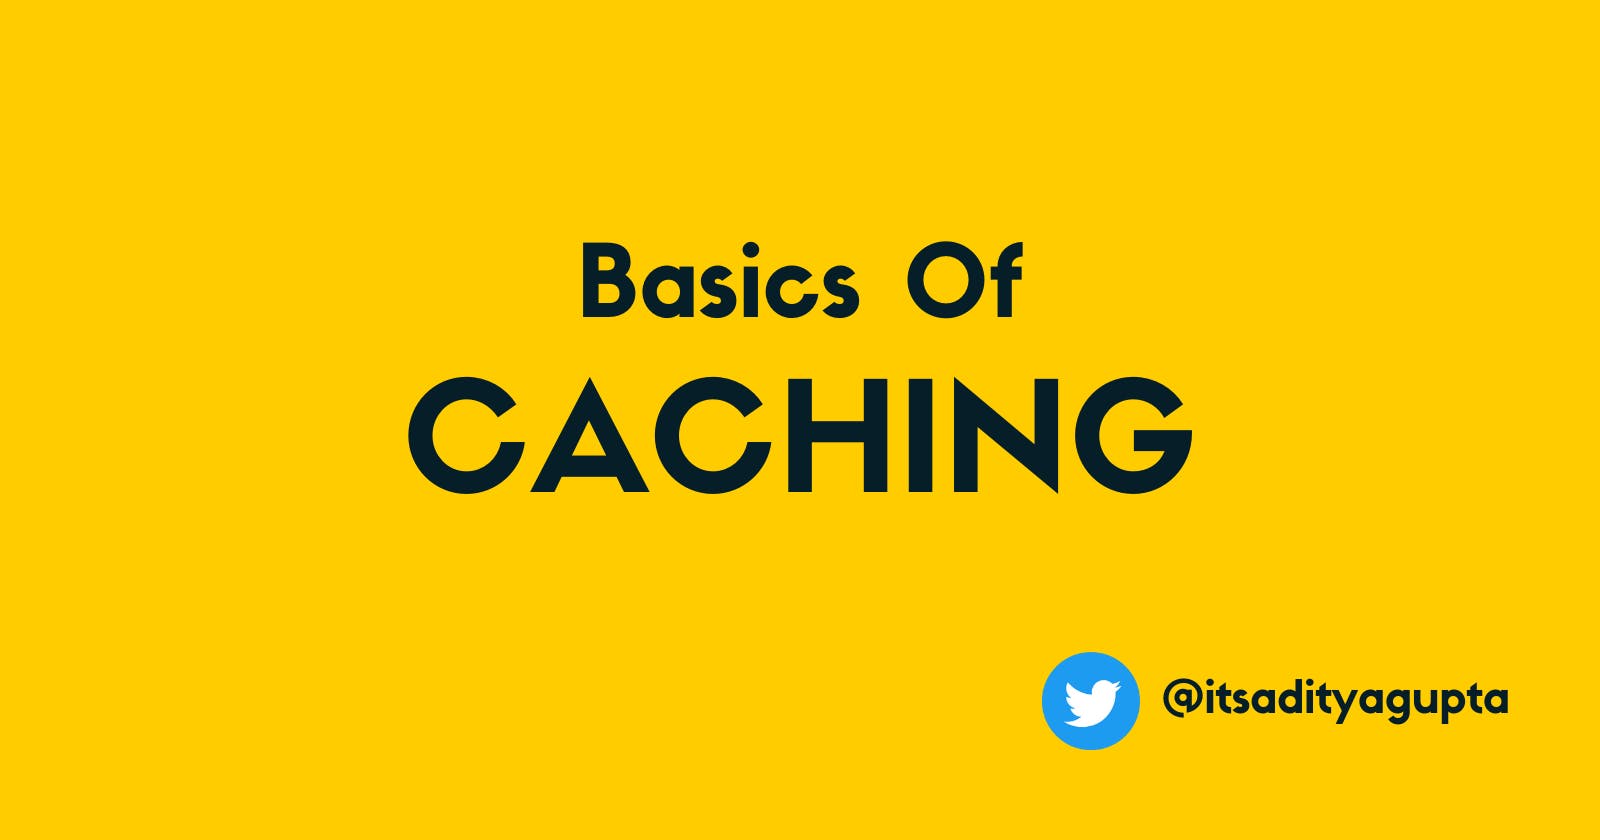 What is Caching?